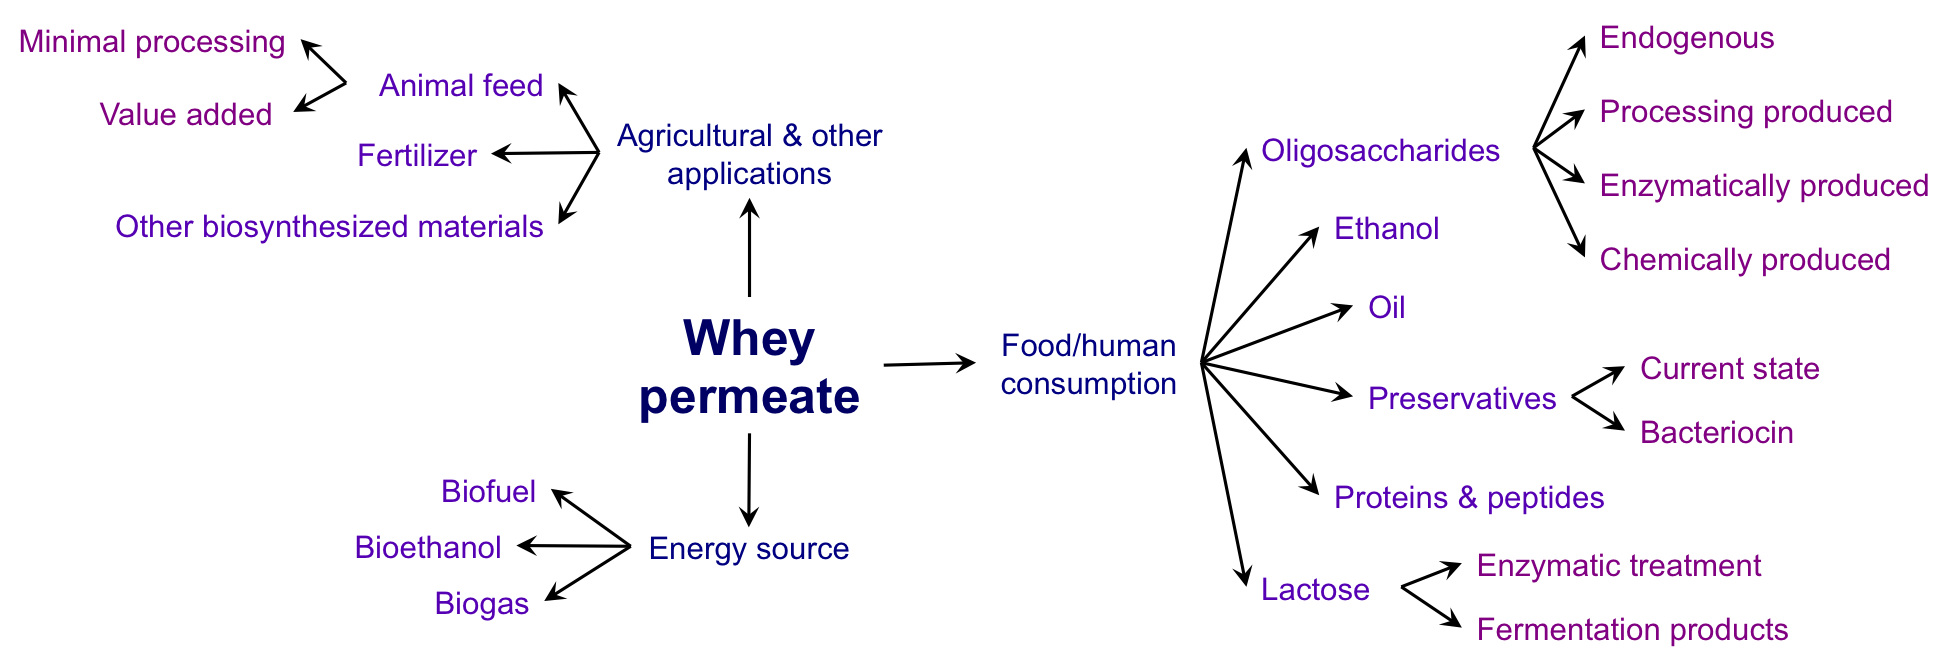 Whey permeate infographic